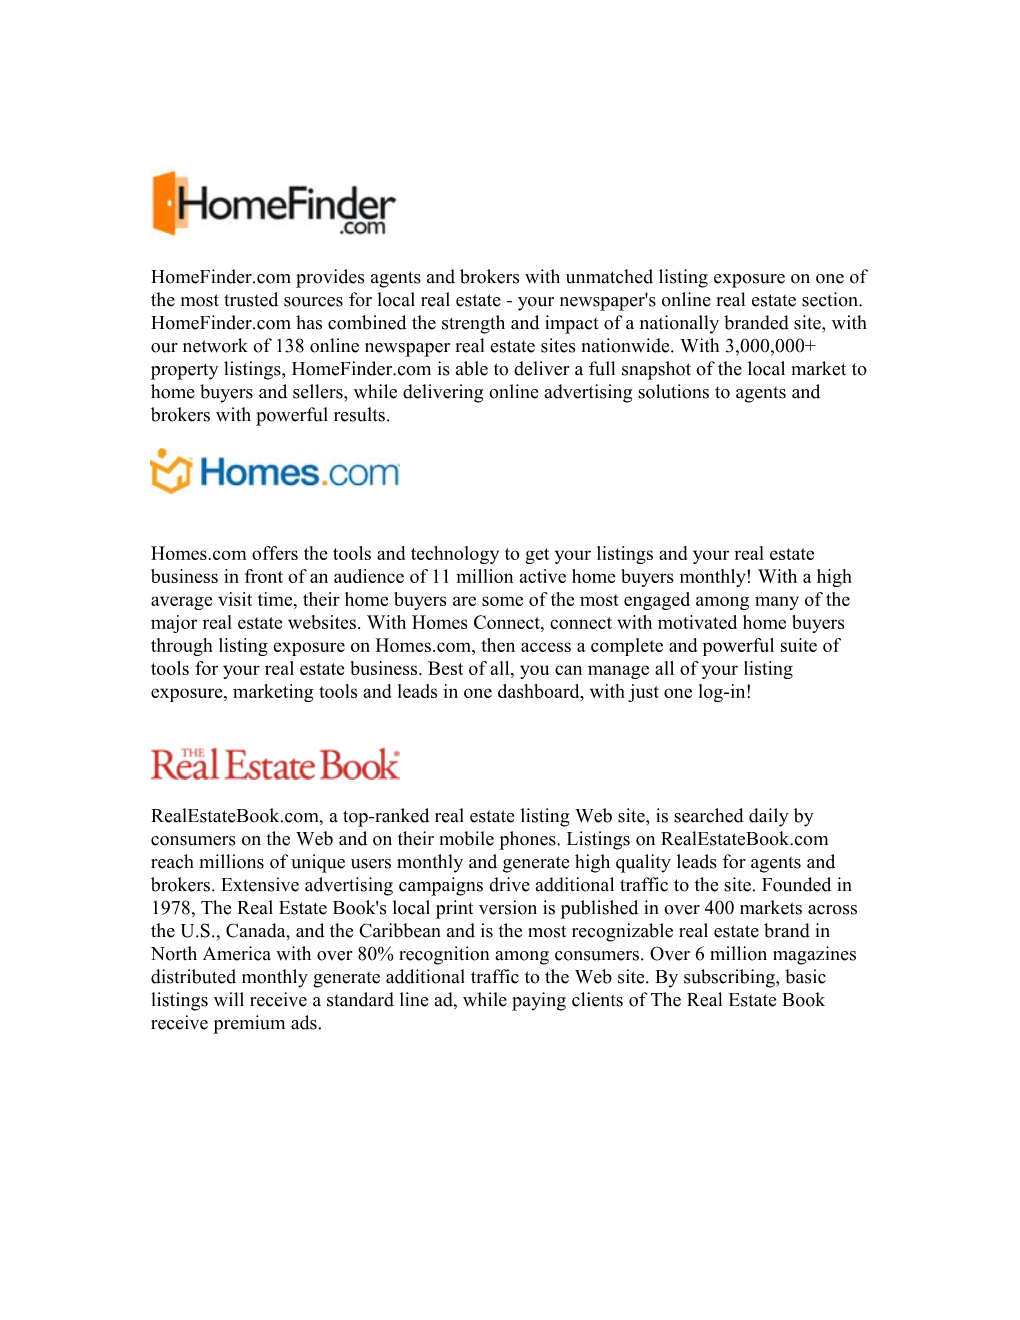 Homefinder.Com Provides Agents and Brokers with Unmatched Listing Exposure on One of The